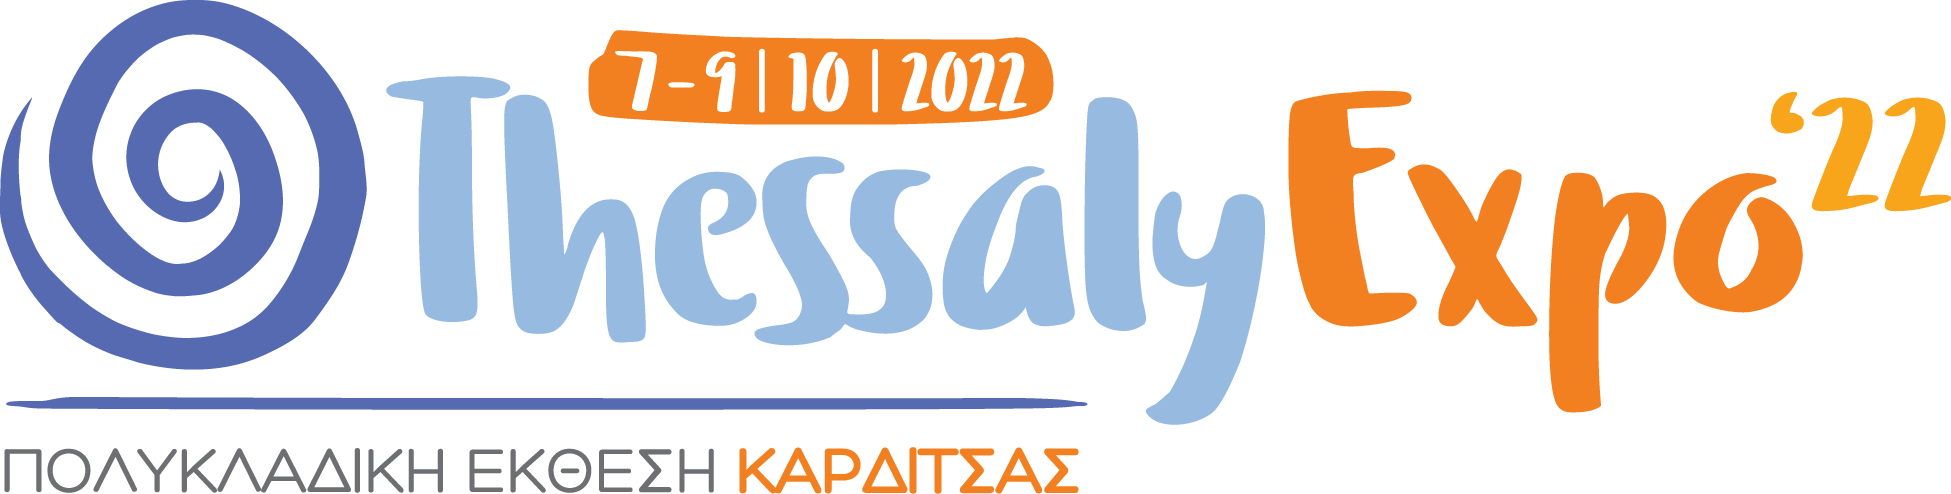 Thessaly Expo